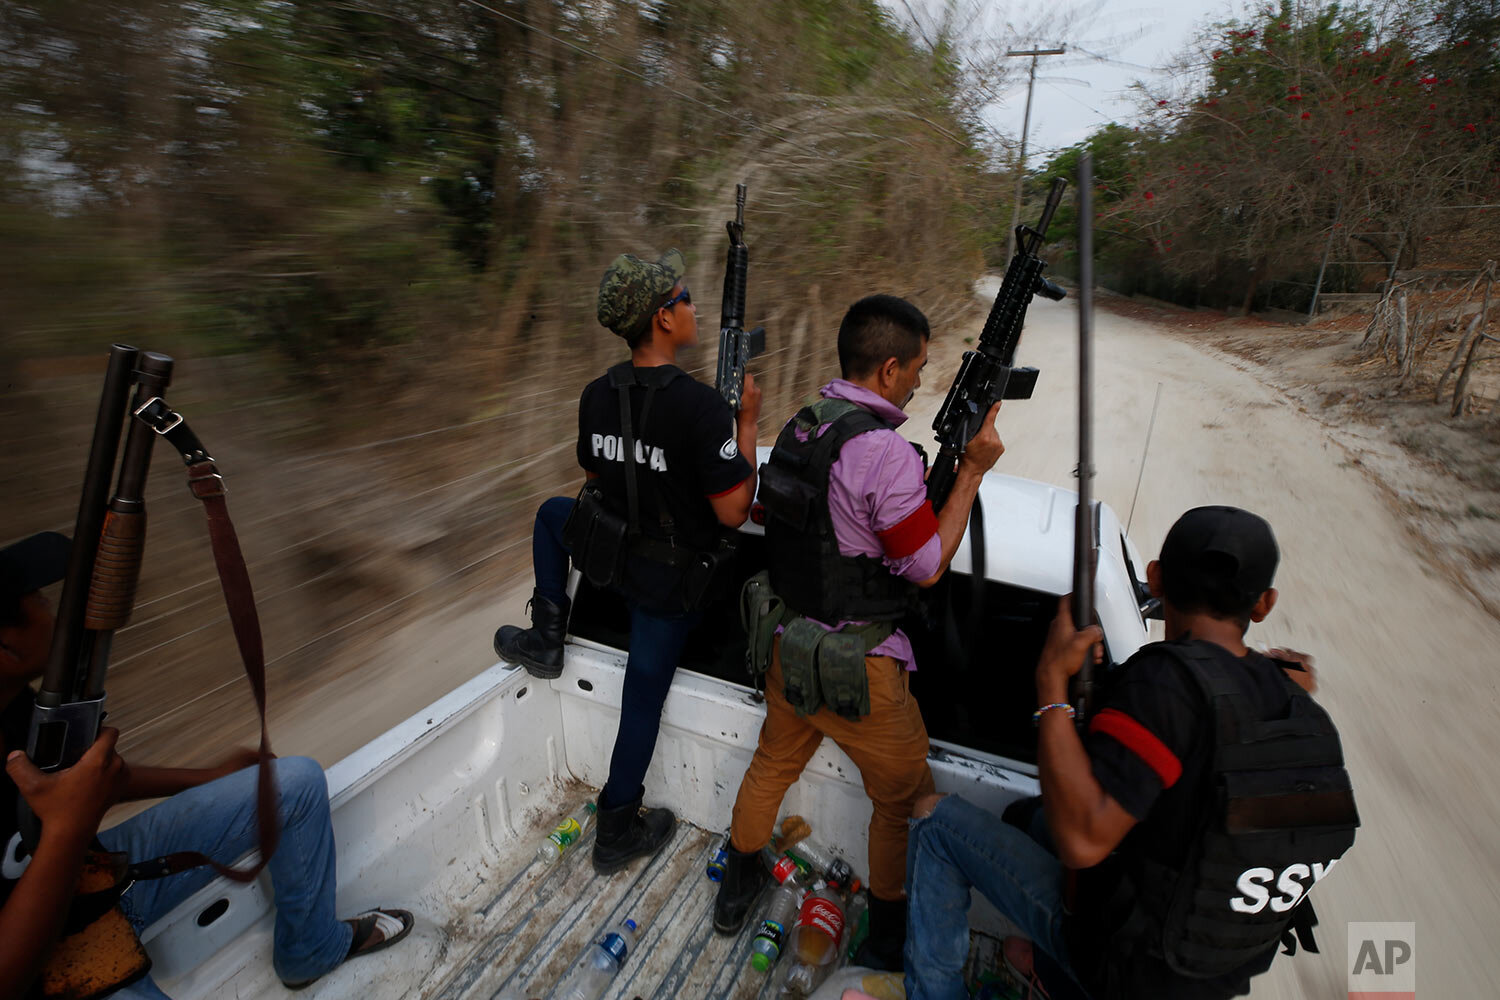  Members of the vigilante group United Front of Guerrero Community Police (FUPCEG) patrol in Xaltianguis, in Mexico's Guerrero state, on May 29, 2019. (AP Photo/Rebecca Blackwell) 